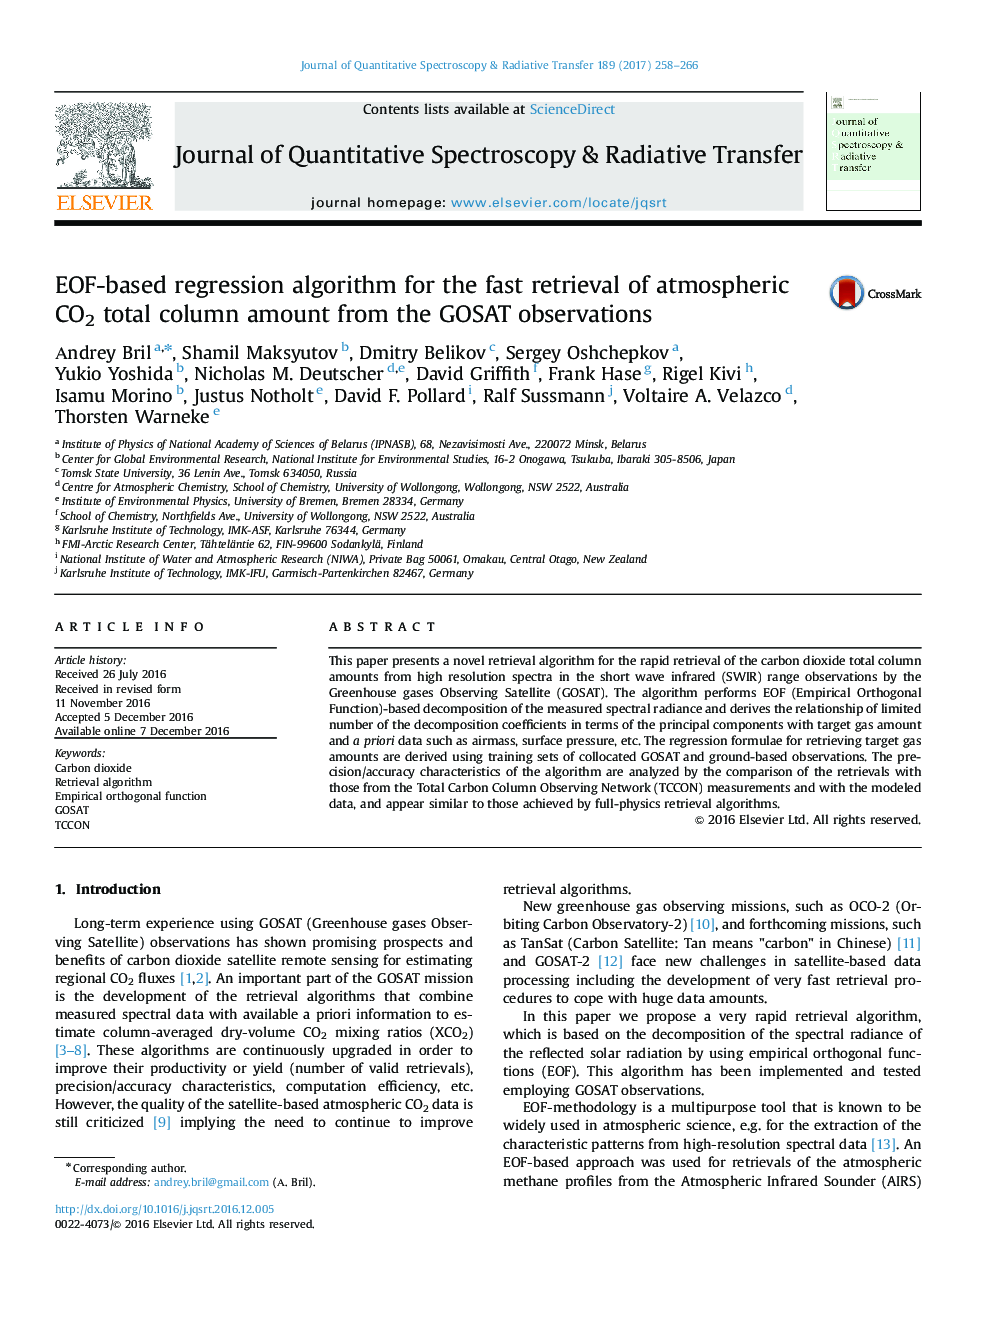 EOF-based regression algorithm for the fast retrieval of atmospheric CO2 total column amount from the GOSAT observations